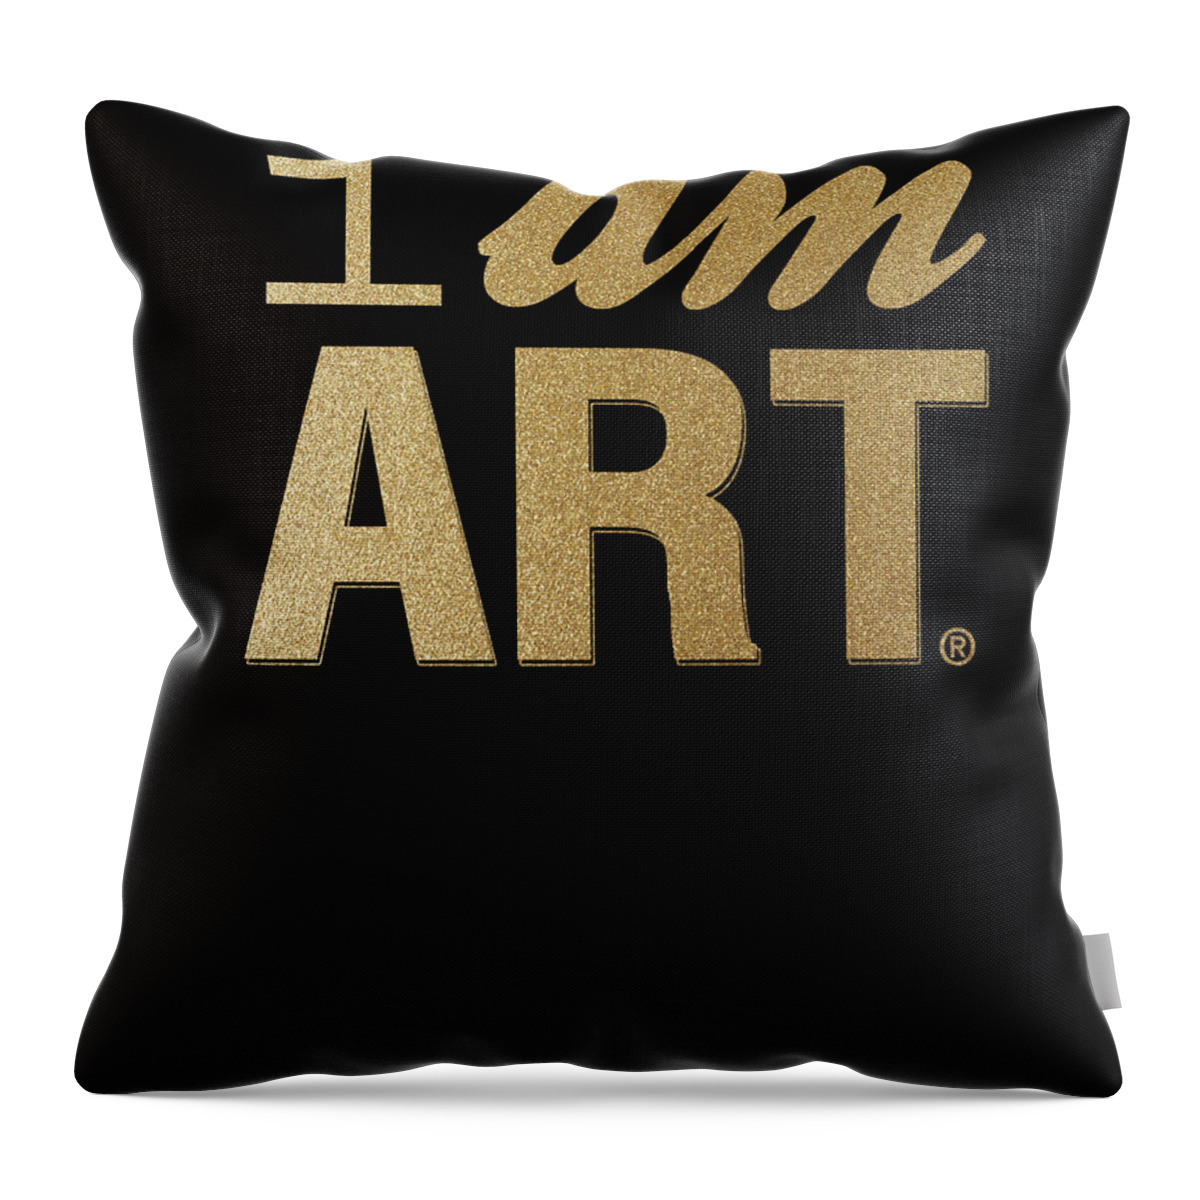 I Am Art Throw Pillow featuring the mixed media I Am Art- Gold by Linda Woods